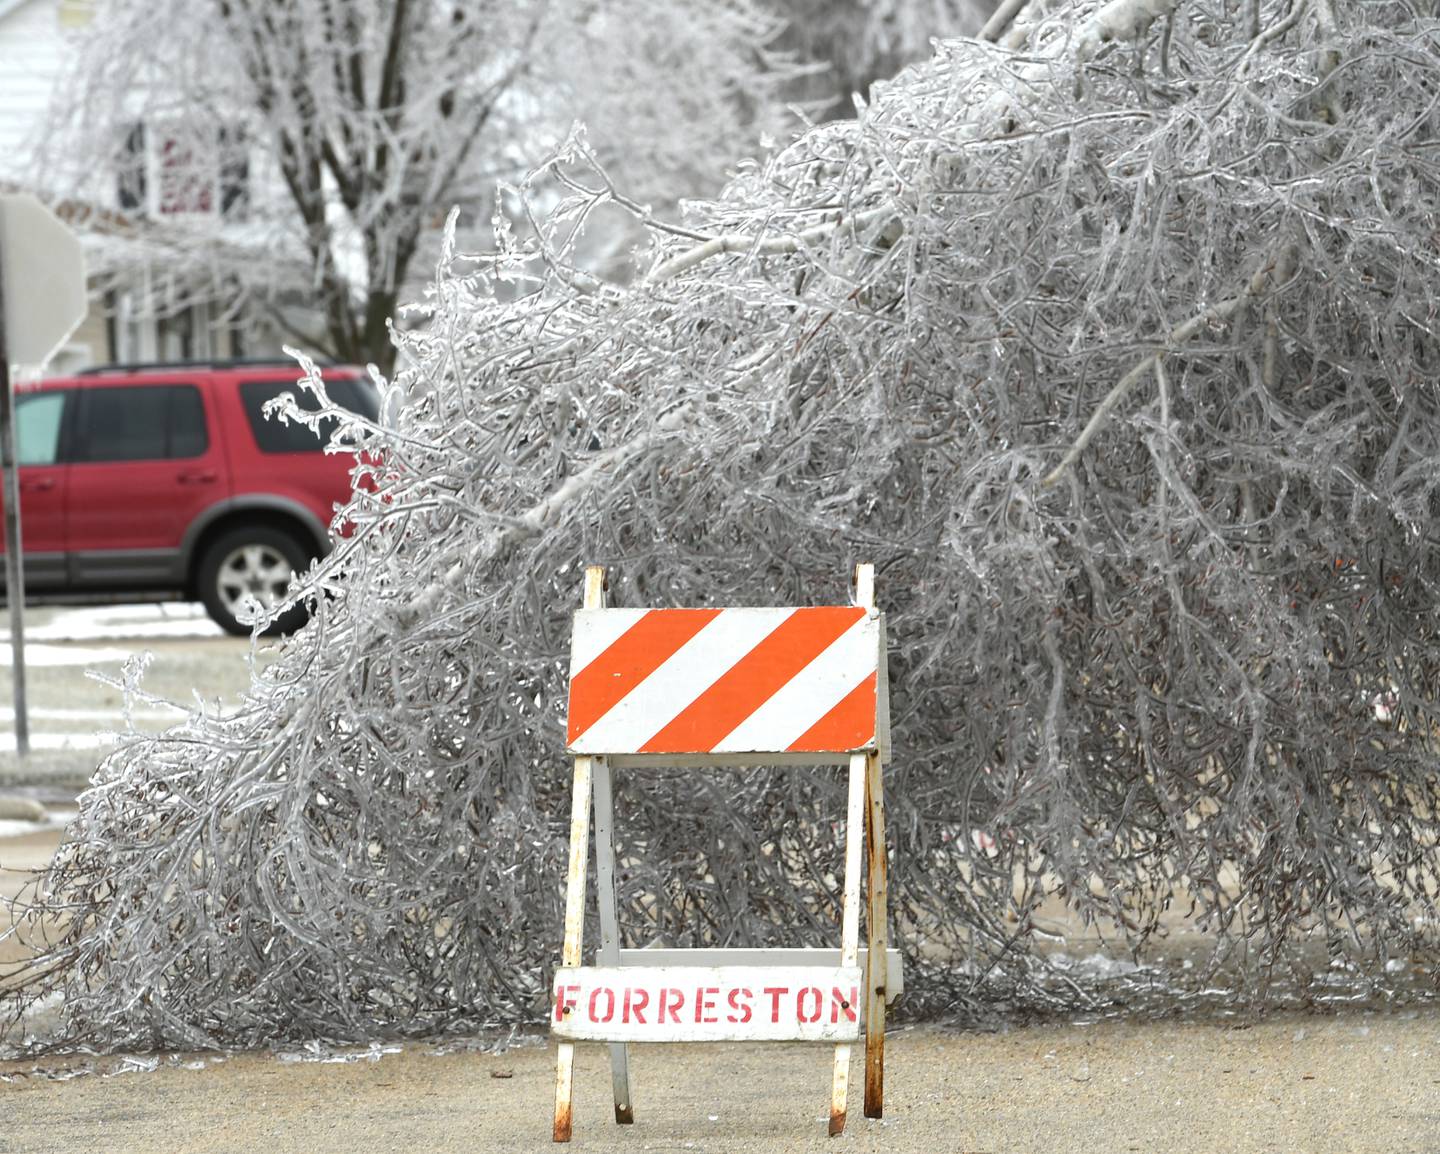 An ice storm, coupled with strong winds, caused numerous electrical outages in Forreston on Thursday. Here, a large ice-covered tree branch blocks a street on Thursday afternoon.